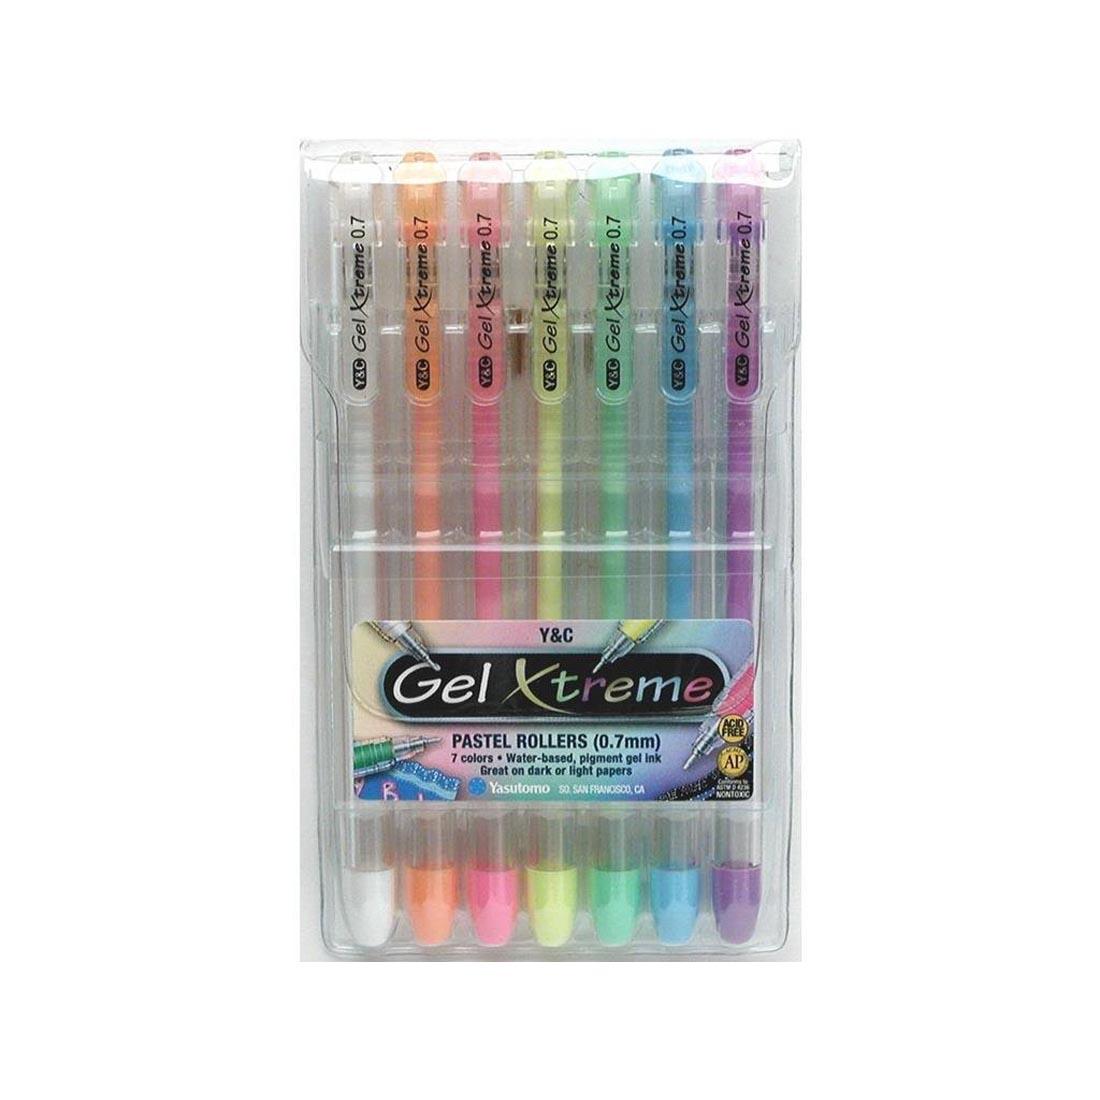 Yasutomo Pastel Gel Xtreme Pens with 7 different colors